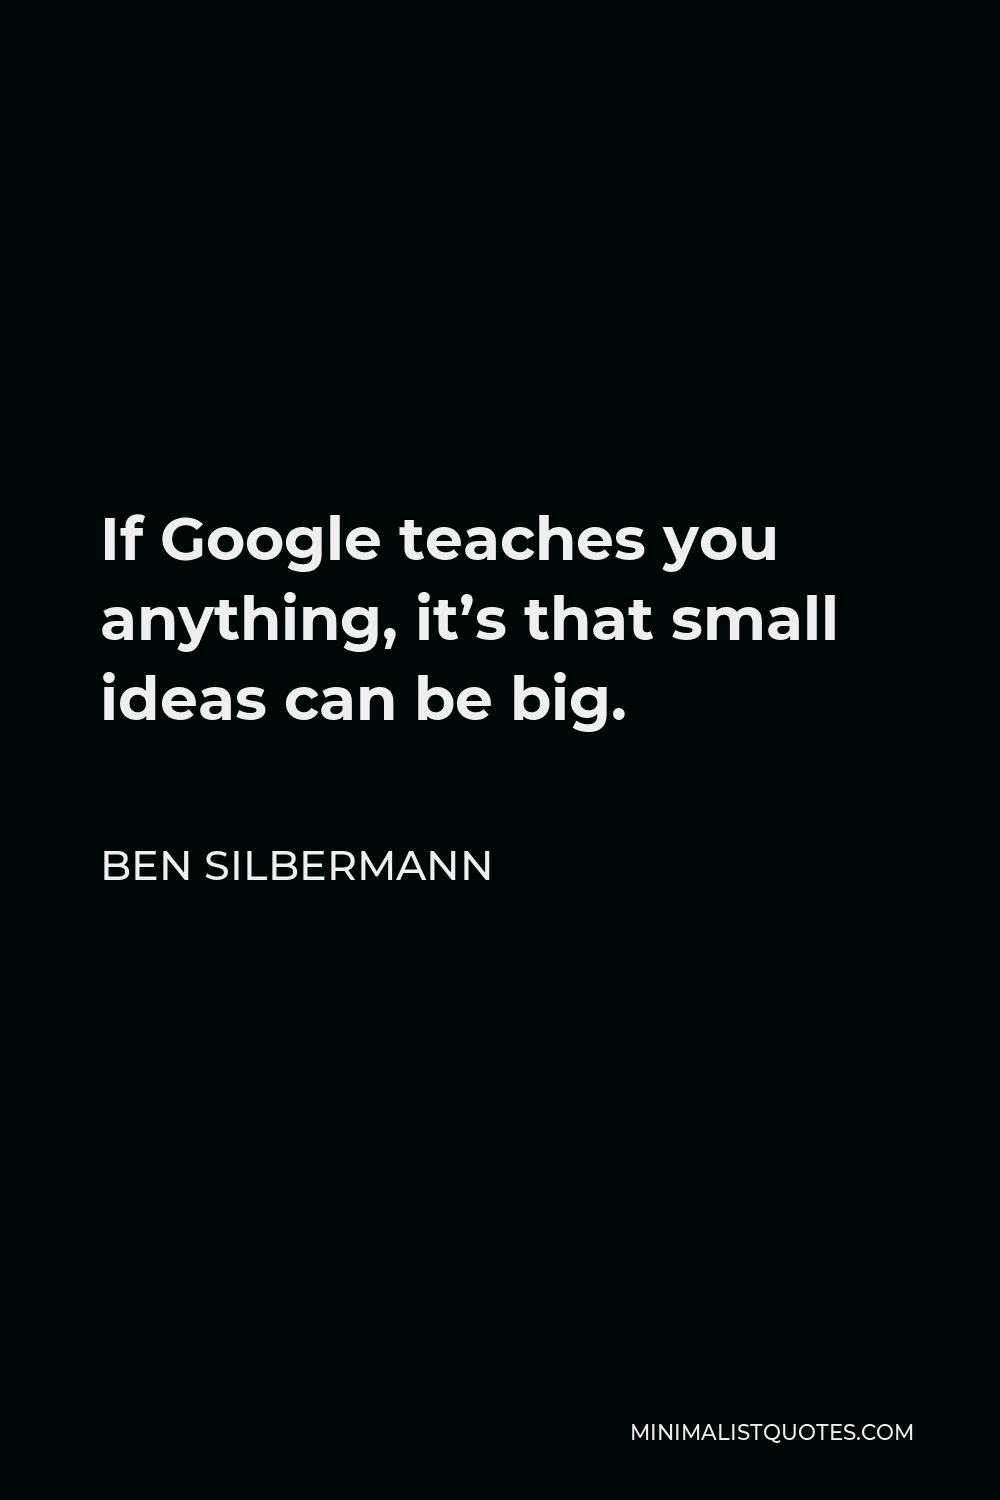 Ben Silbermann Quote - If Google teaches you anything, it’s that small ideas can be big.